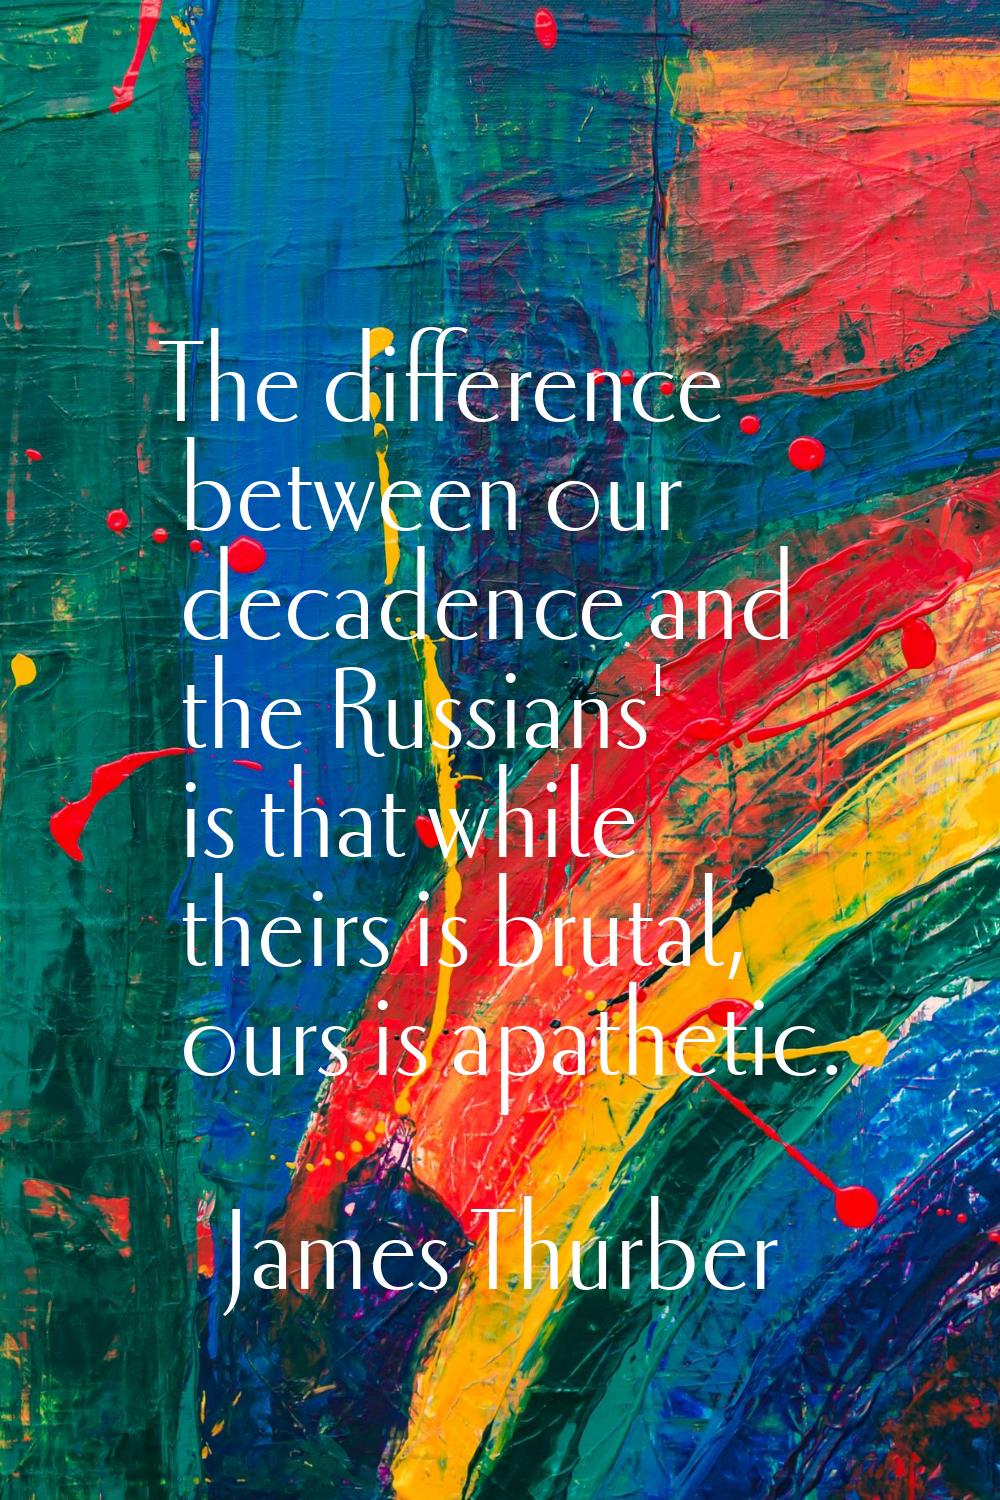 The difference between our decadence and the Russians' is that while theirs is brutal, ours is apat